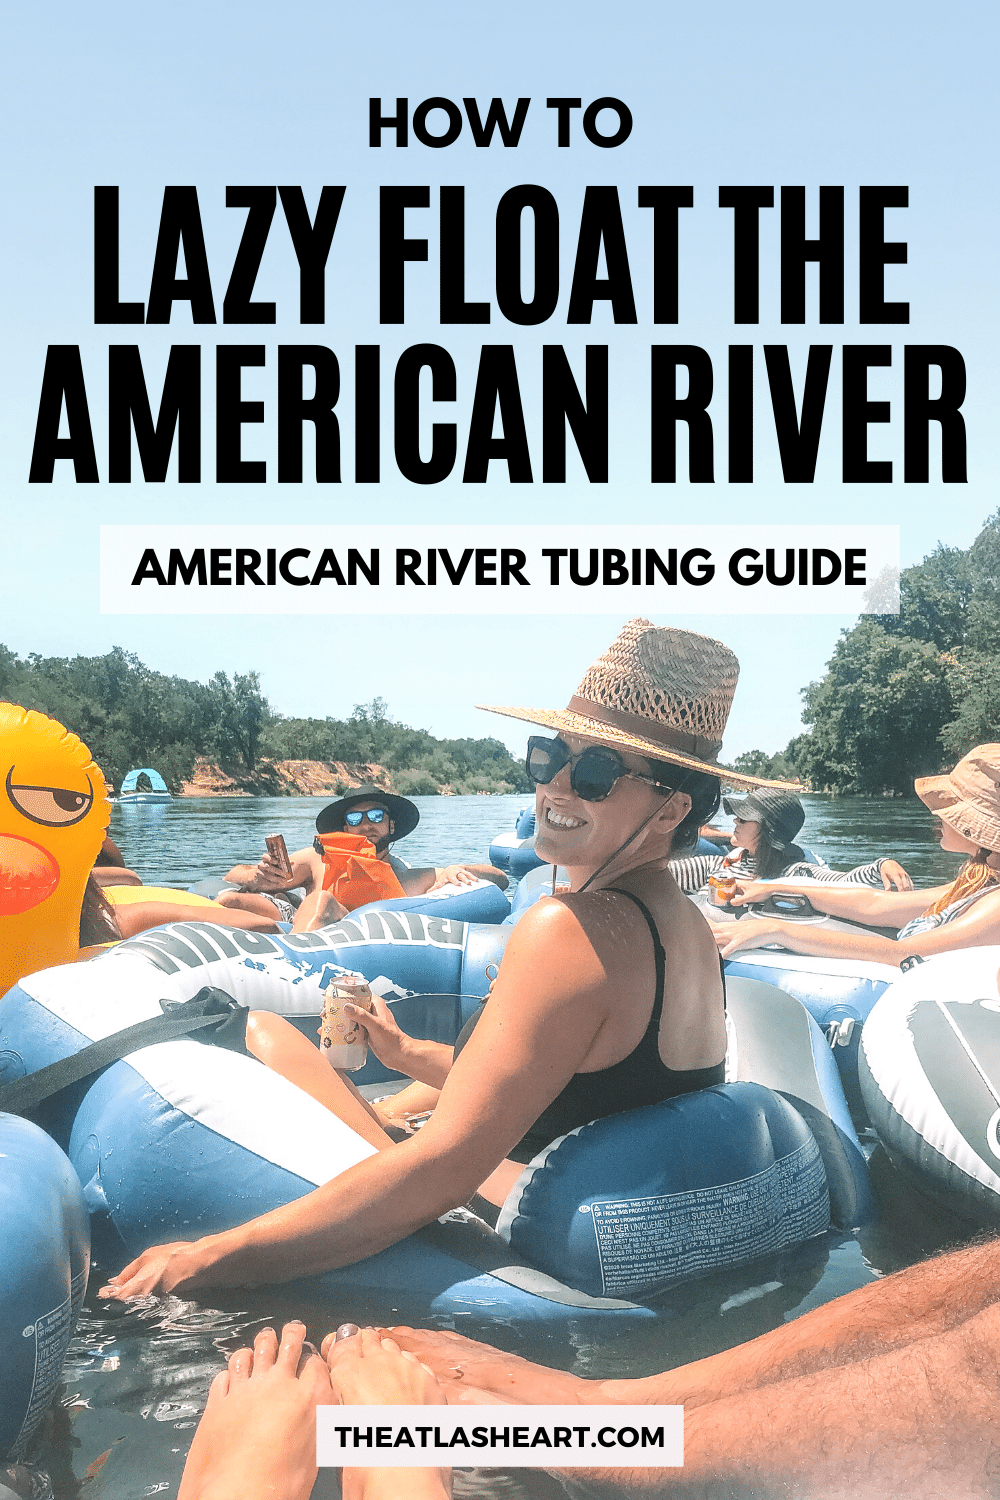 How to Lazy Float the American River (American River Tubing Guide)